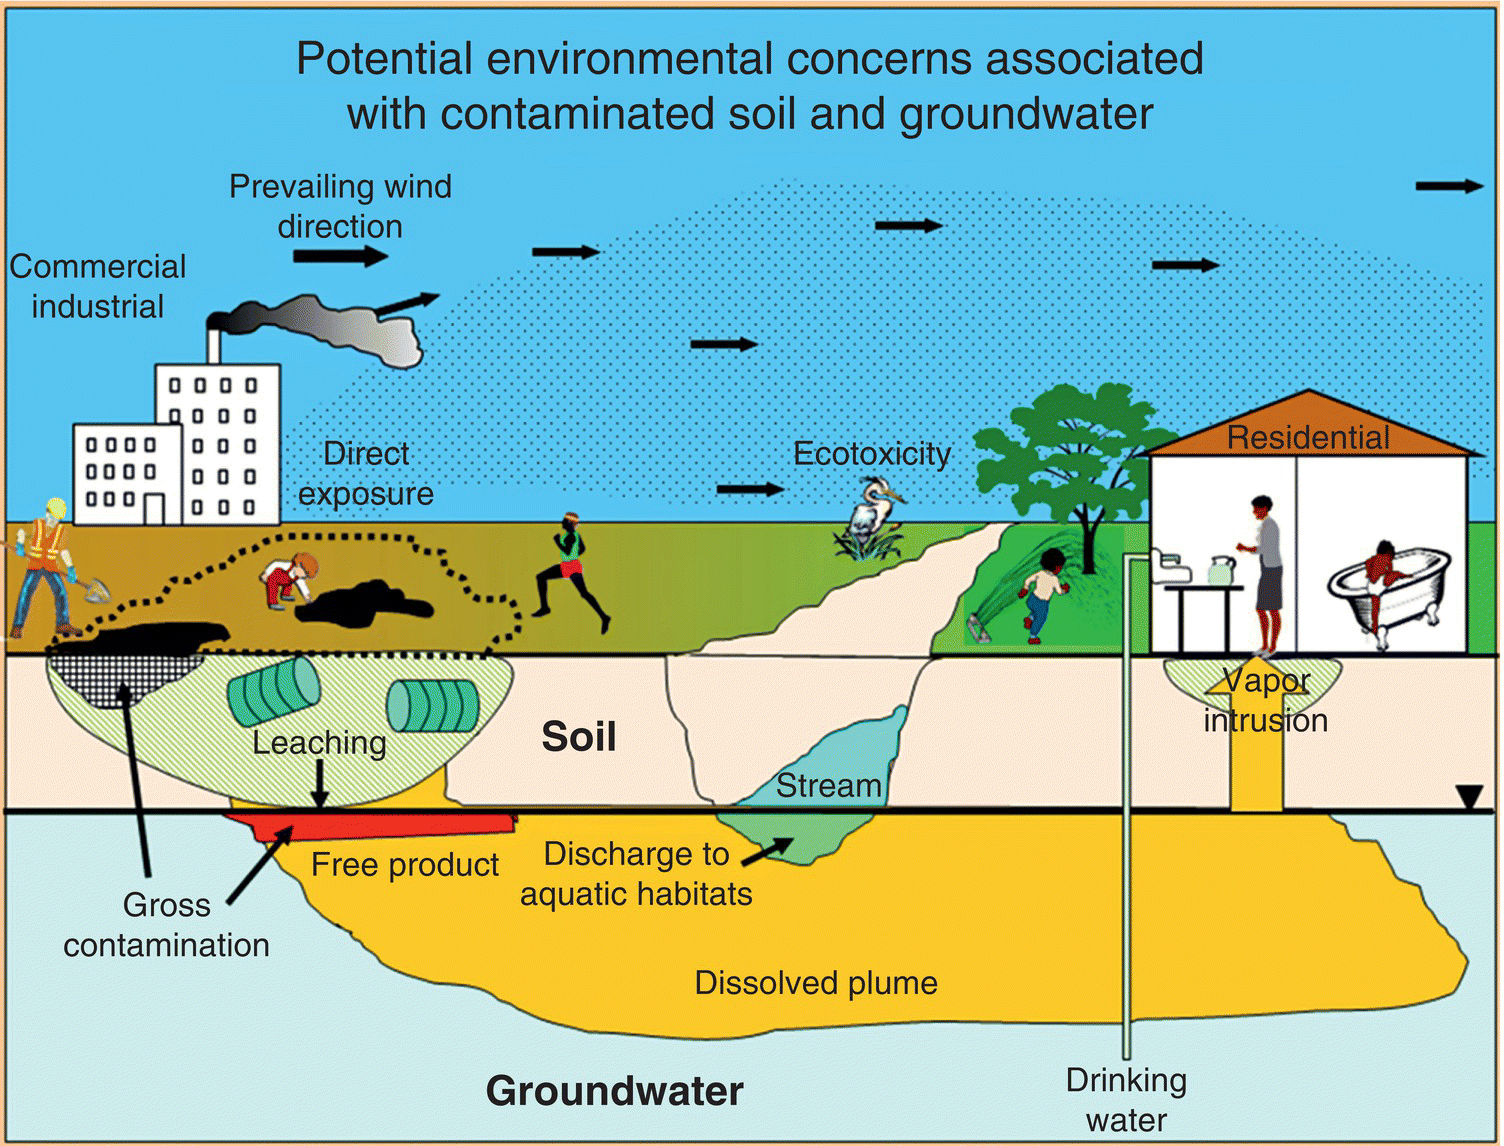 Diagram illustrating the potential environmental concerns associated with contaminated soil and groundwater, with gross contamination, leaching, groundwater, dissolved plume, steam, etc. being marked.